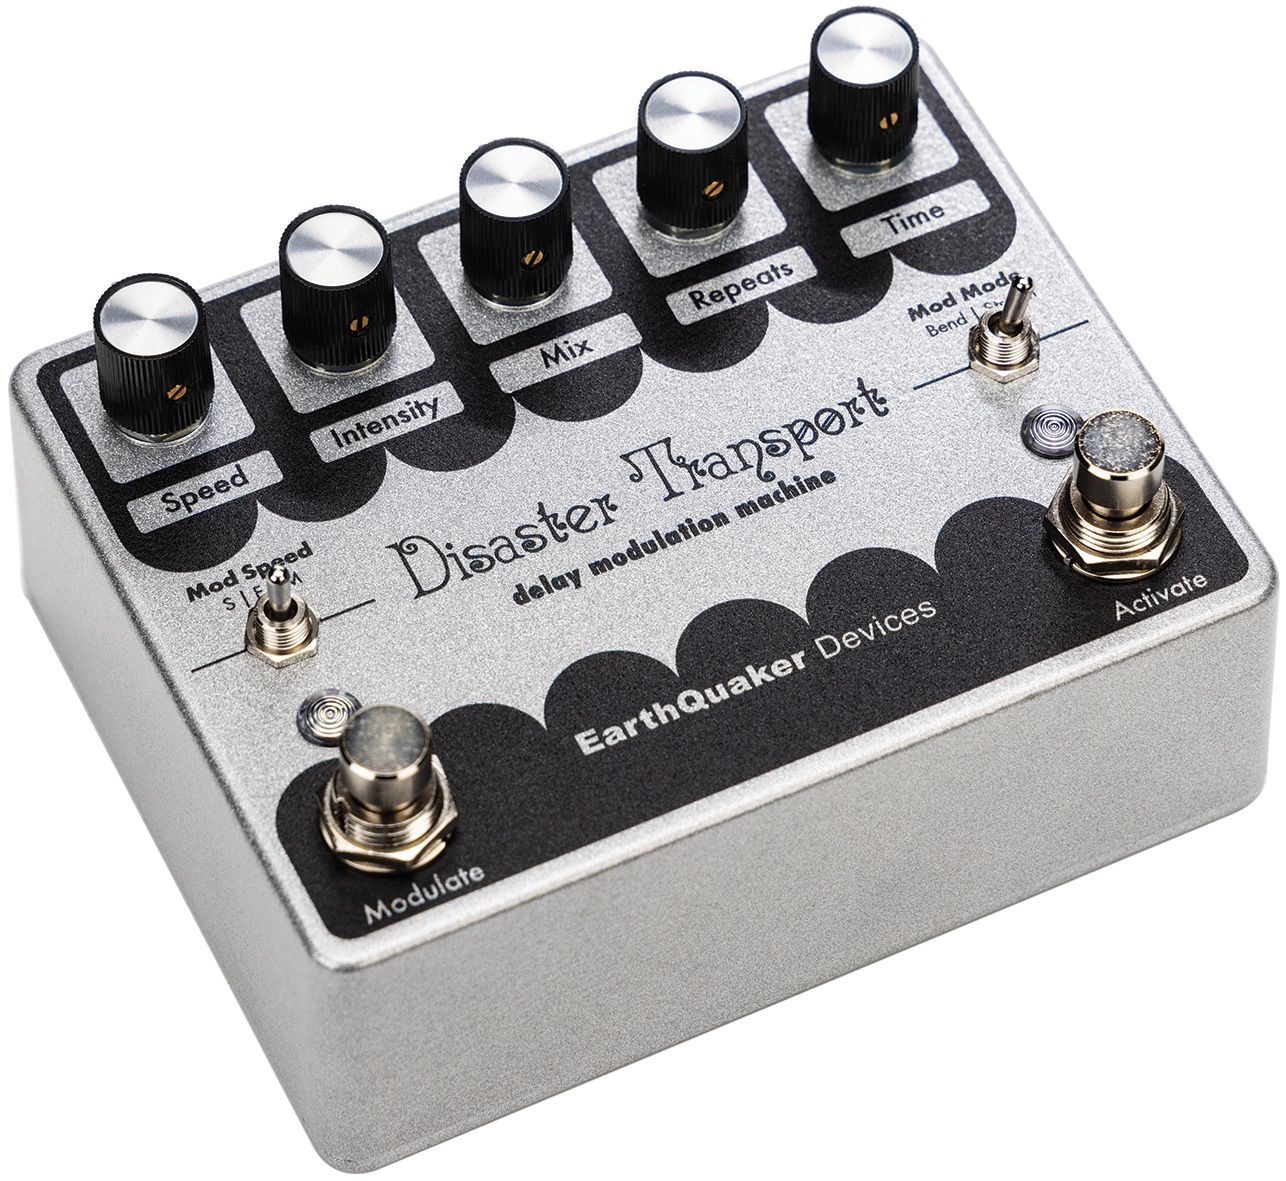 Earthquaker Disaster Transport Legacy Reissue - Reverb/delay/echo effect pedaal - Variation 1